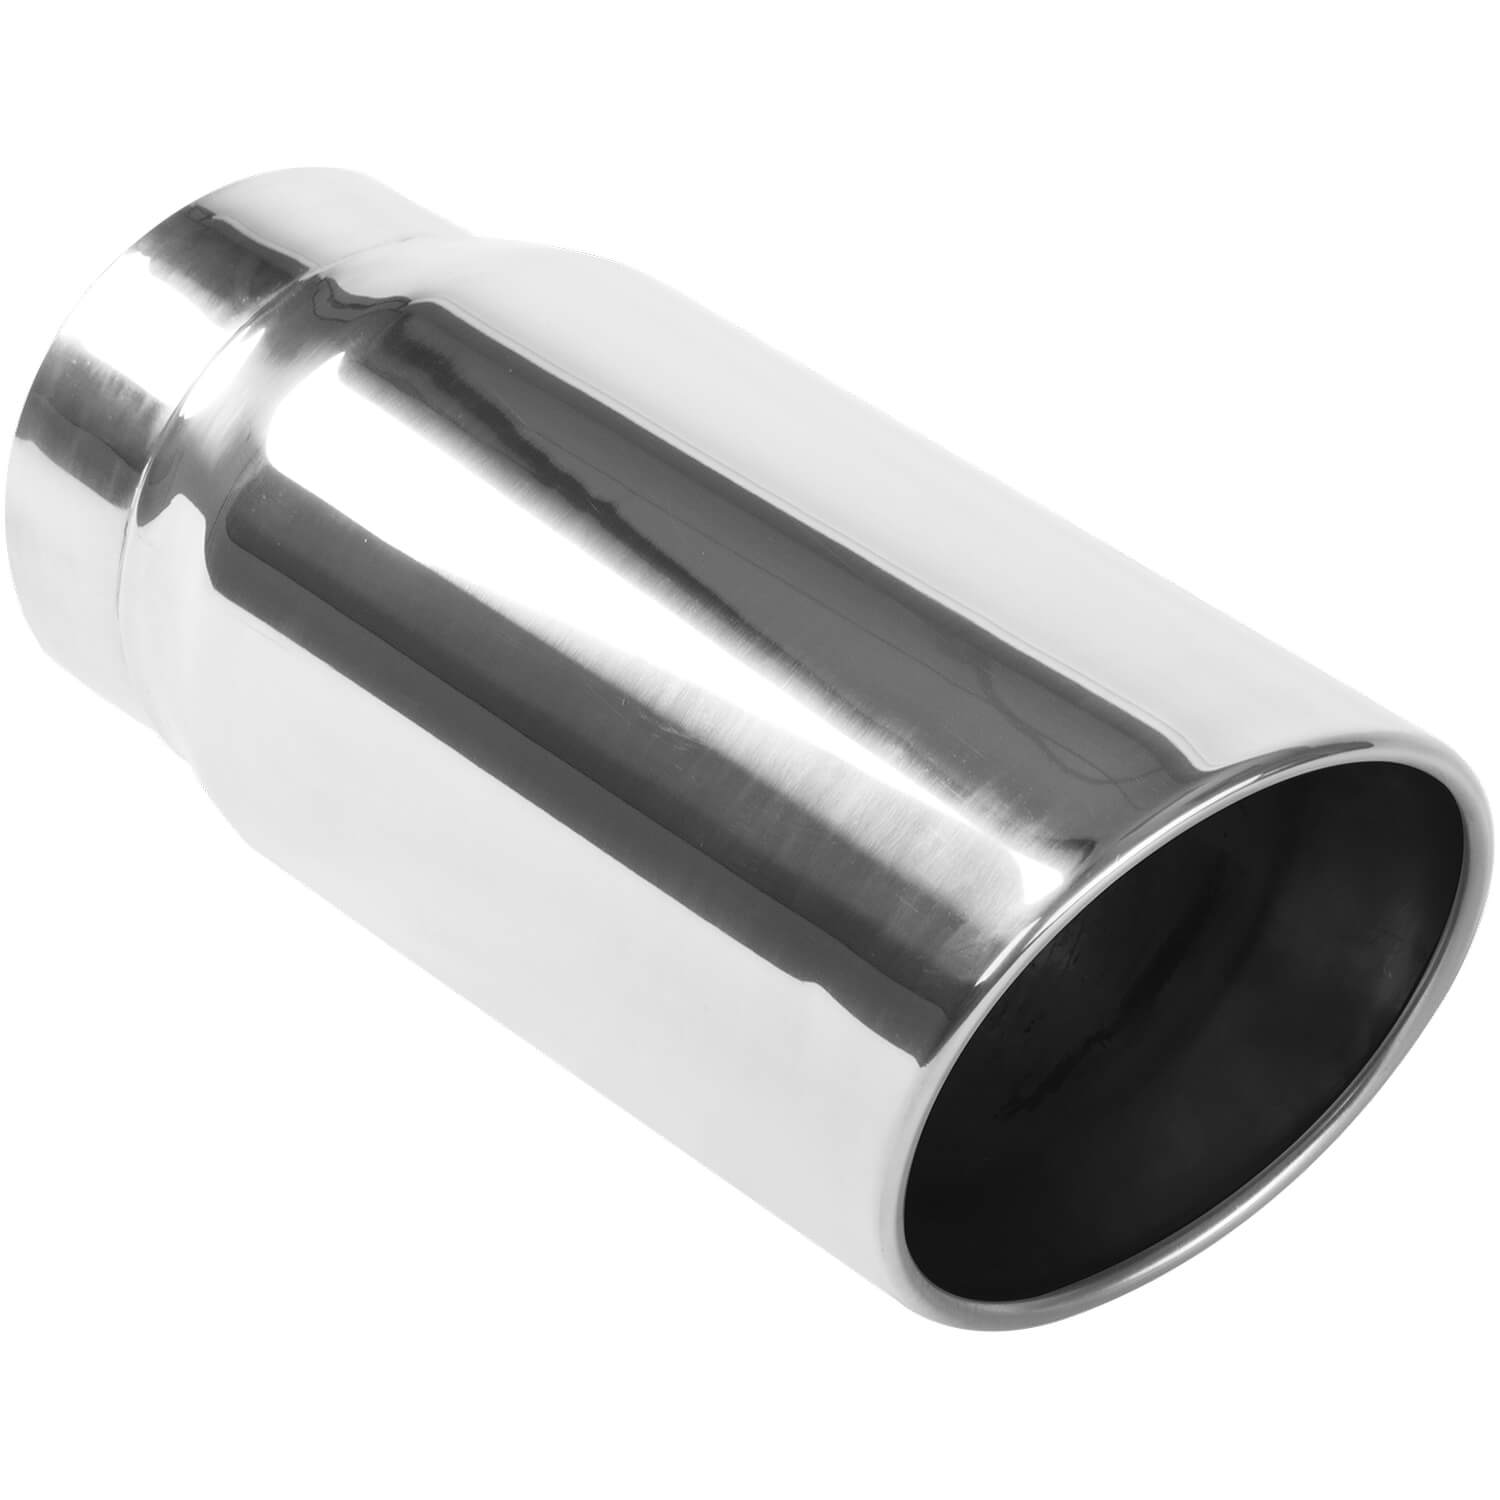 Polished Stainless Steel Weld-On Single Exhaust Tip Inlet Inside Diameter: 5"